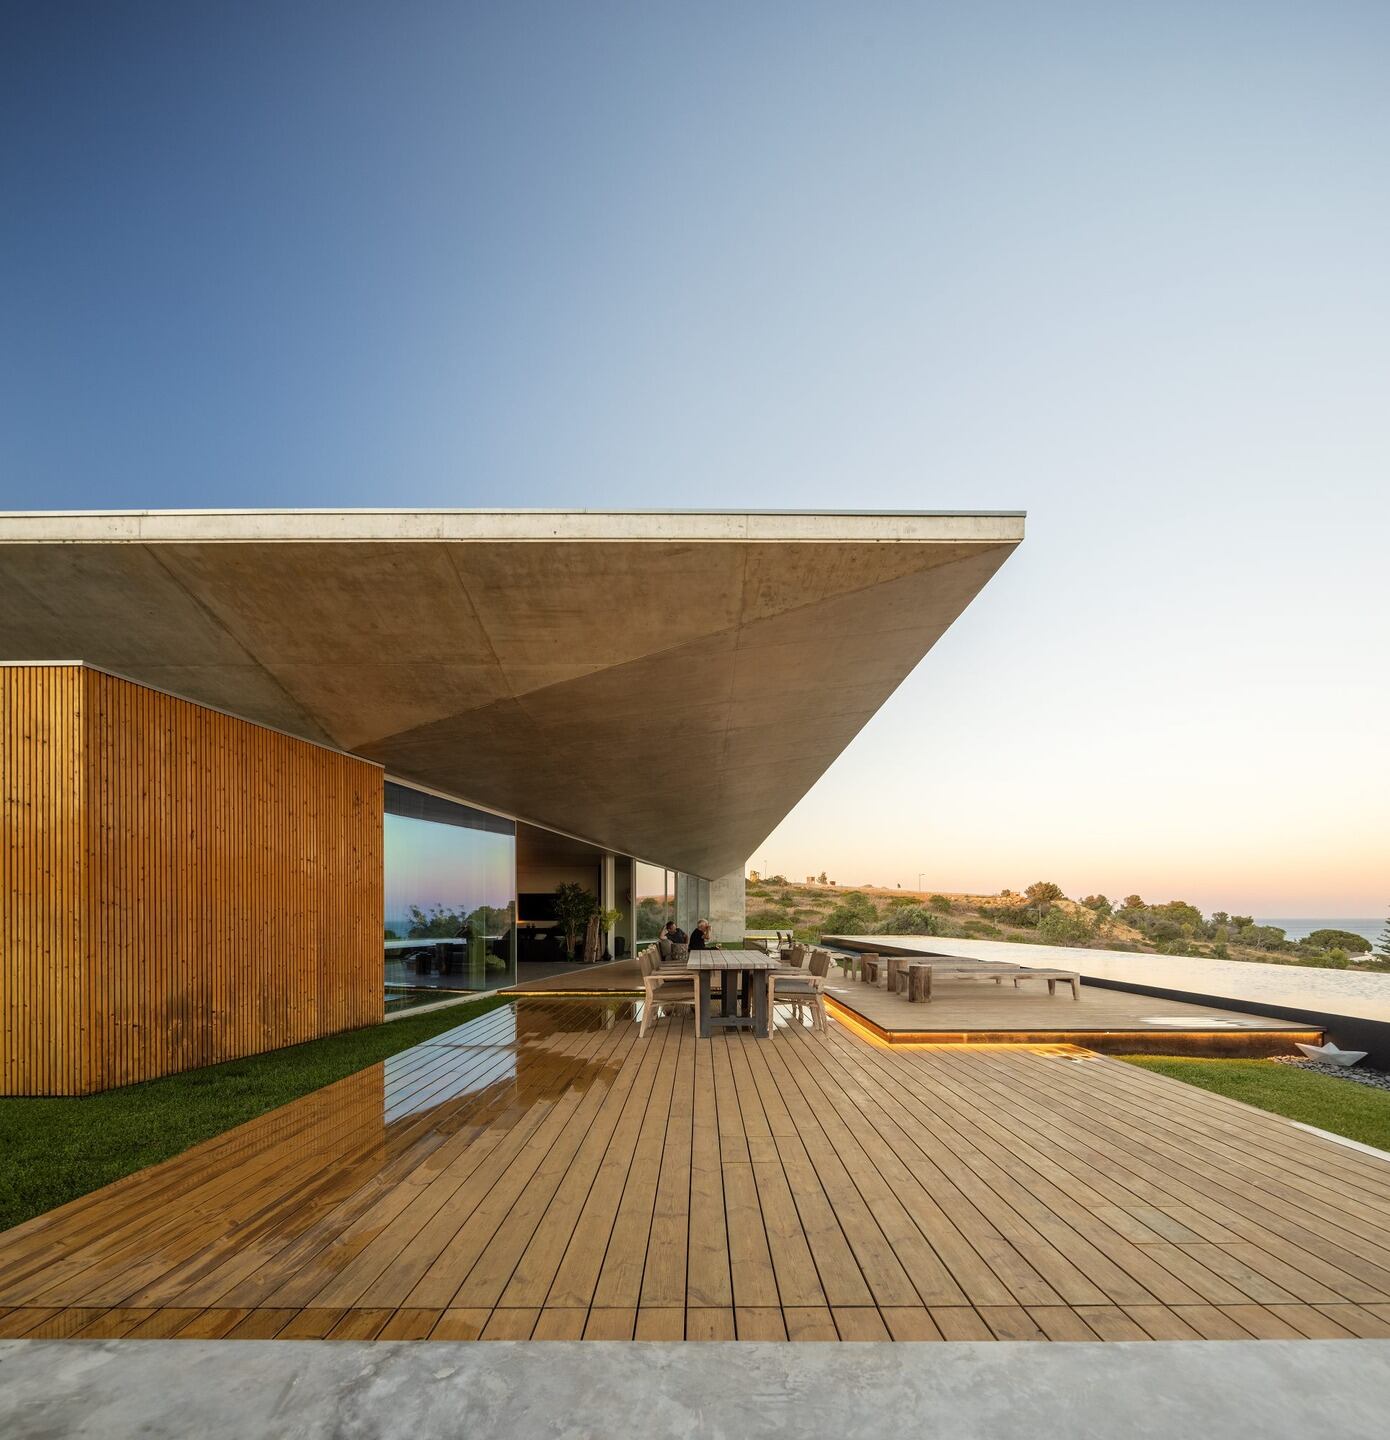 Casa Libre: Portugal’s Epitome of Seamless Indoor-Outdoor Living